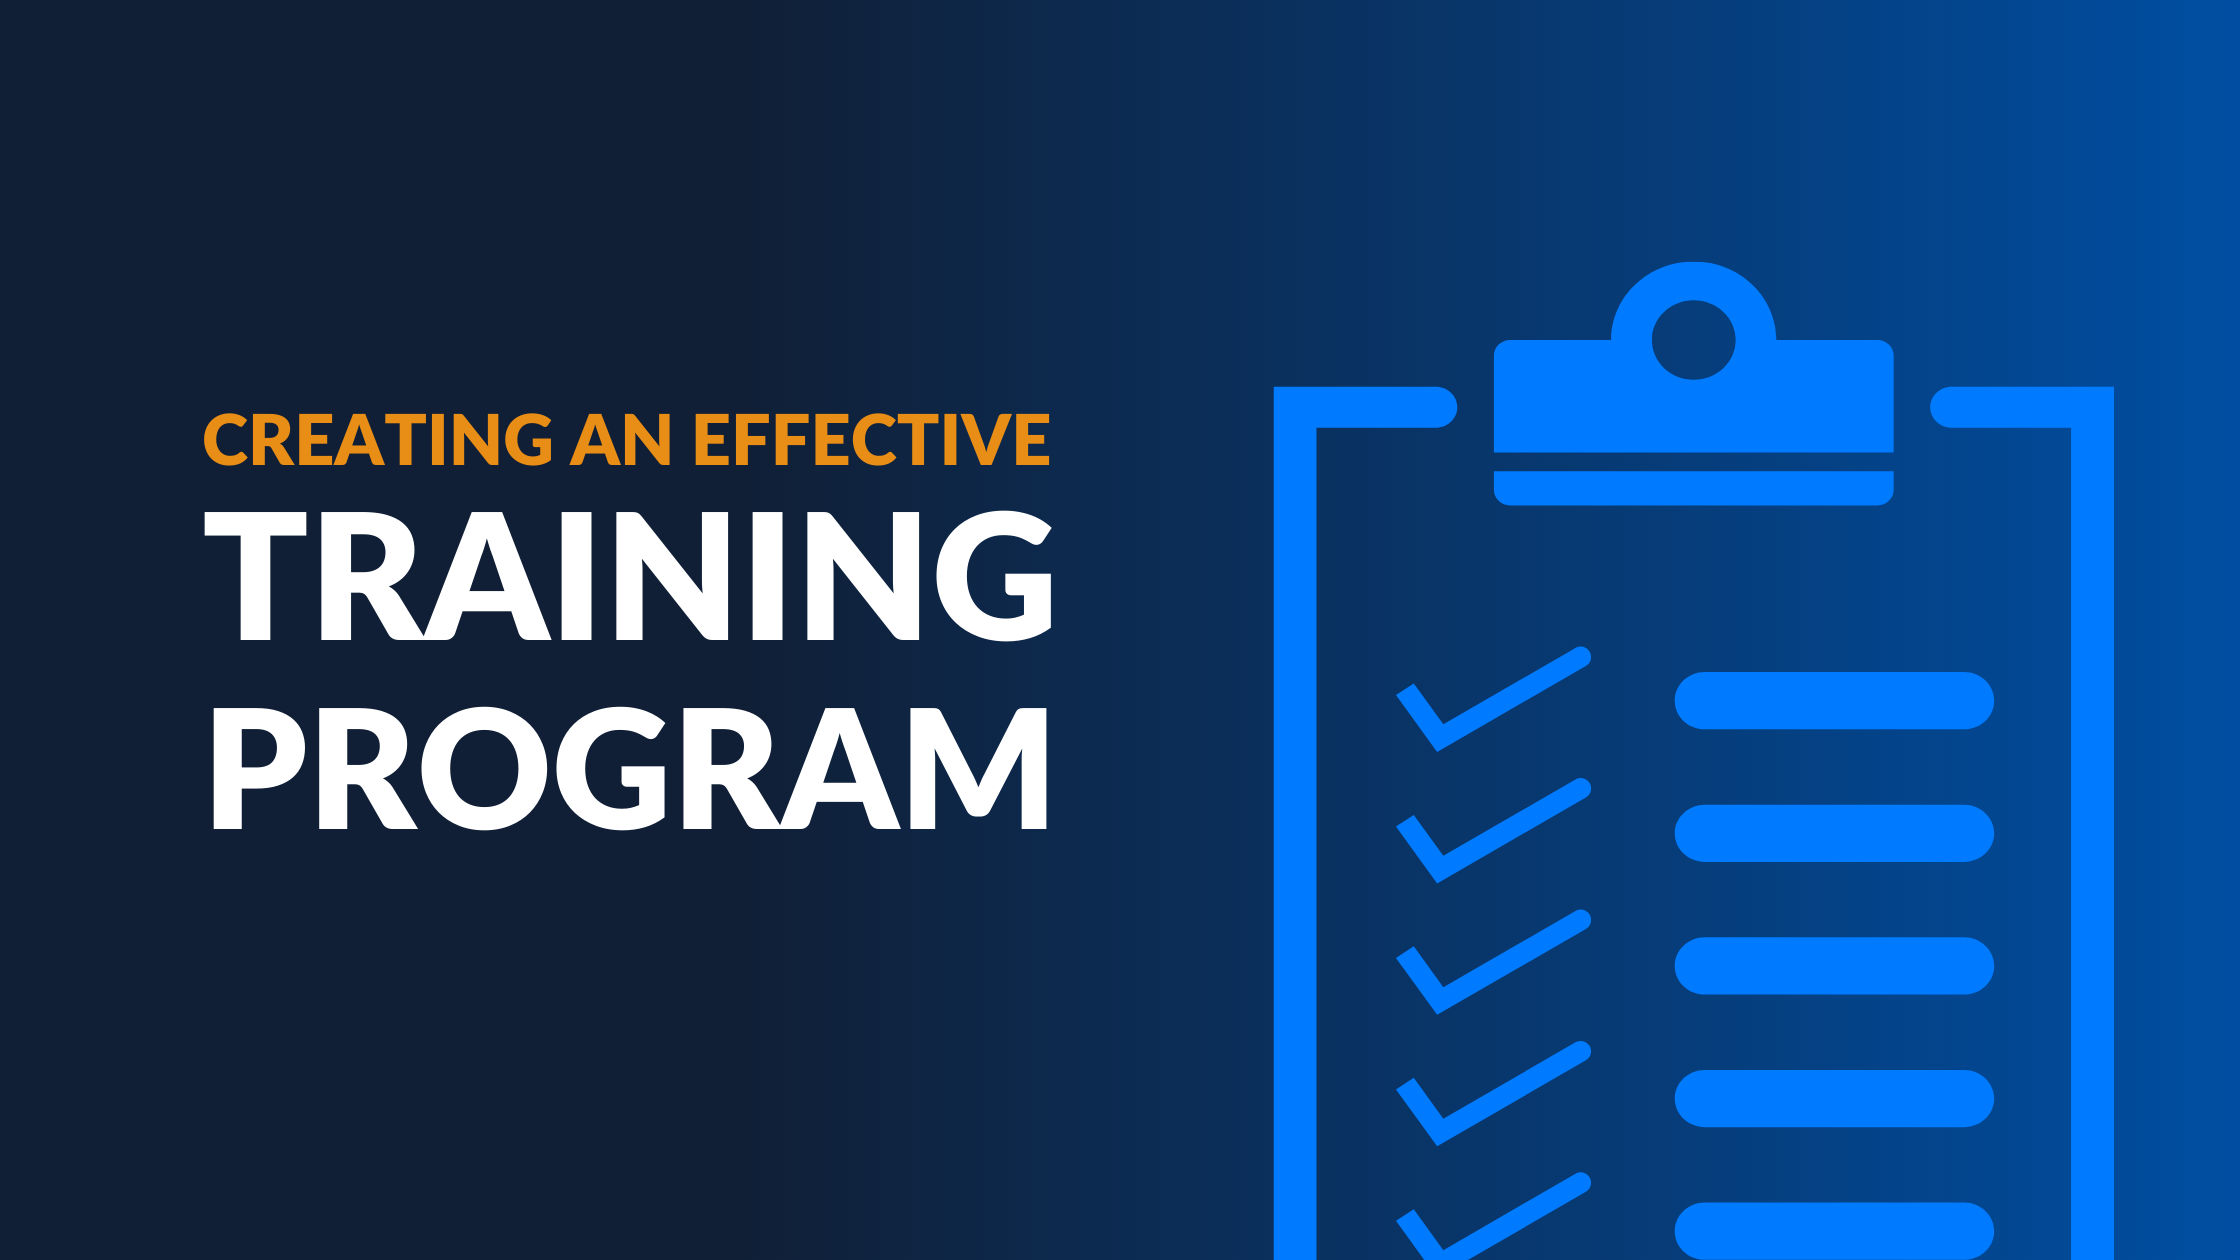 Creating a Training Program: 7 Steps to Developing Stronger Employees